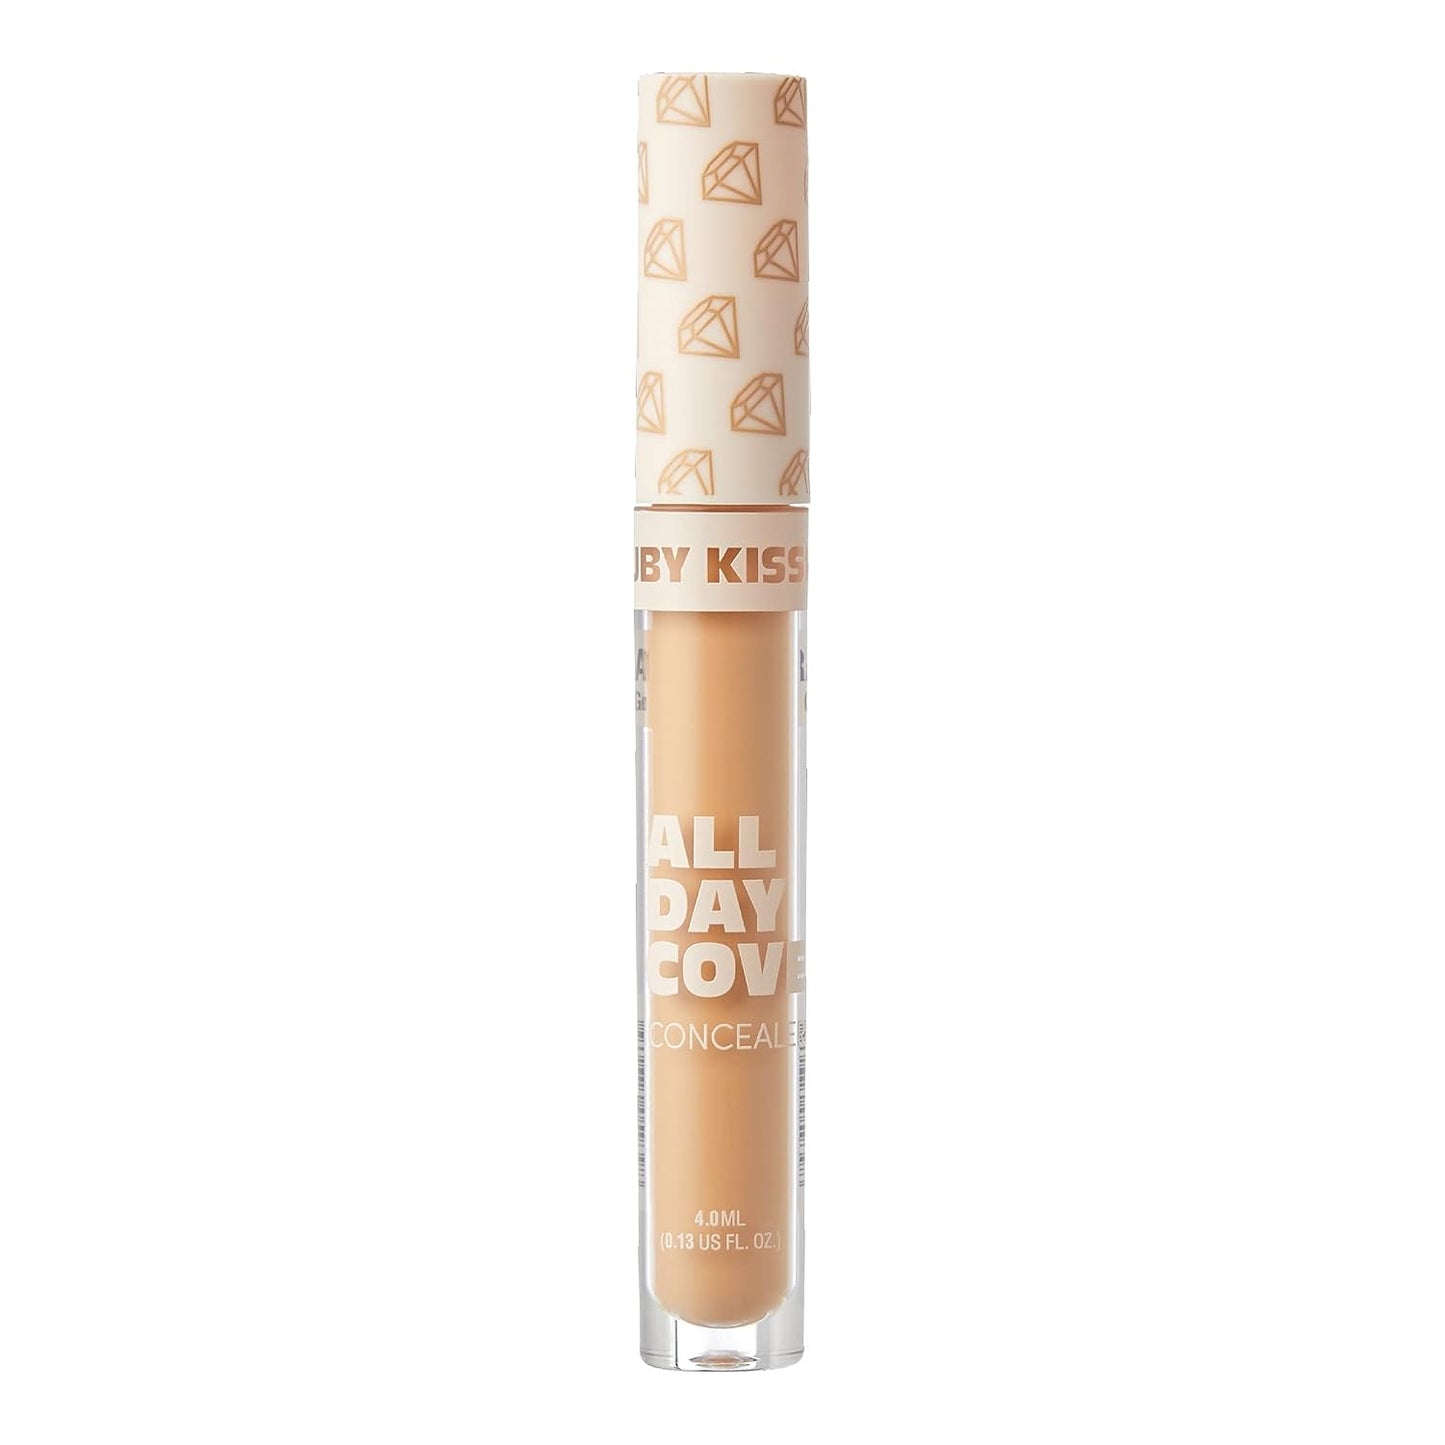 Ruby Kisses All Day Concealer RAC